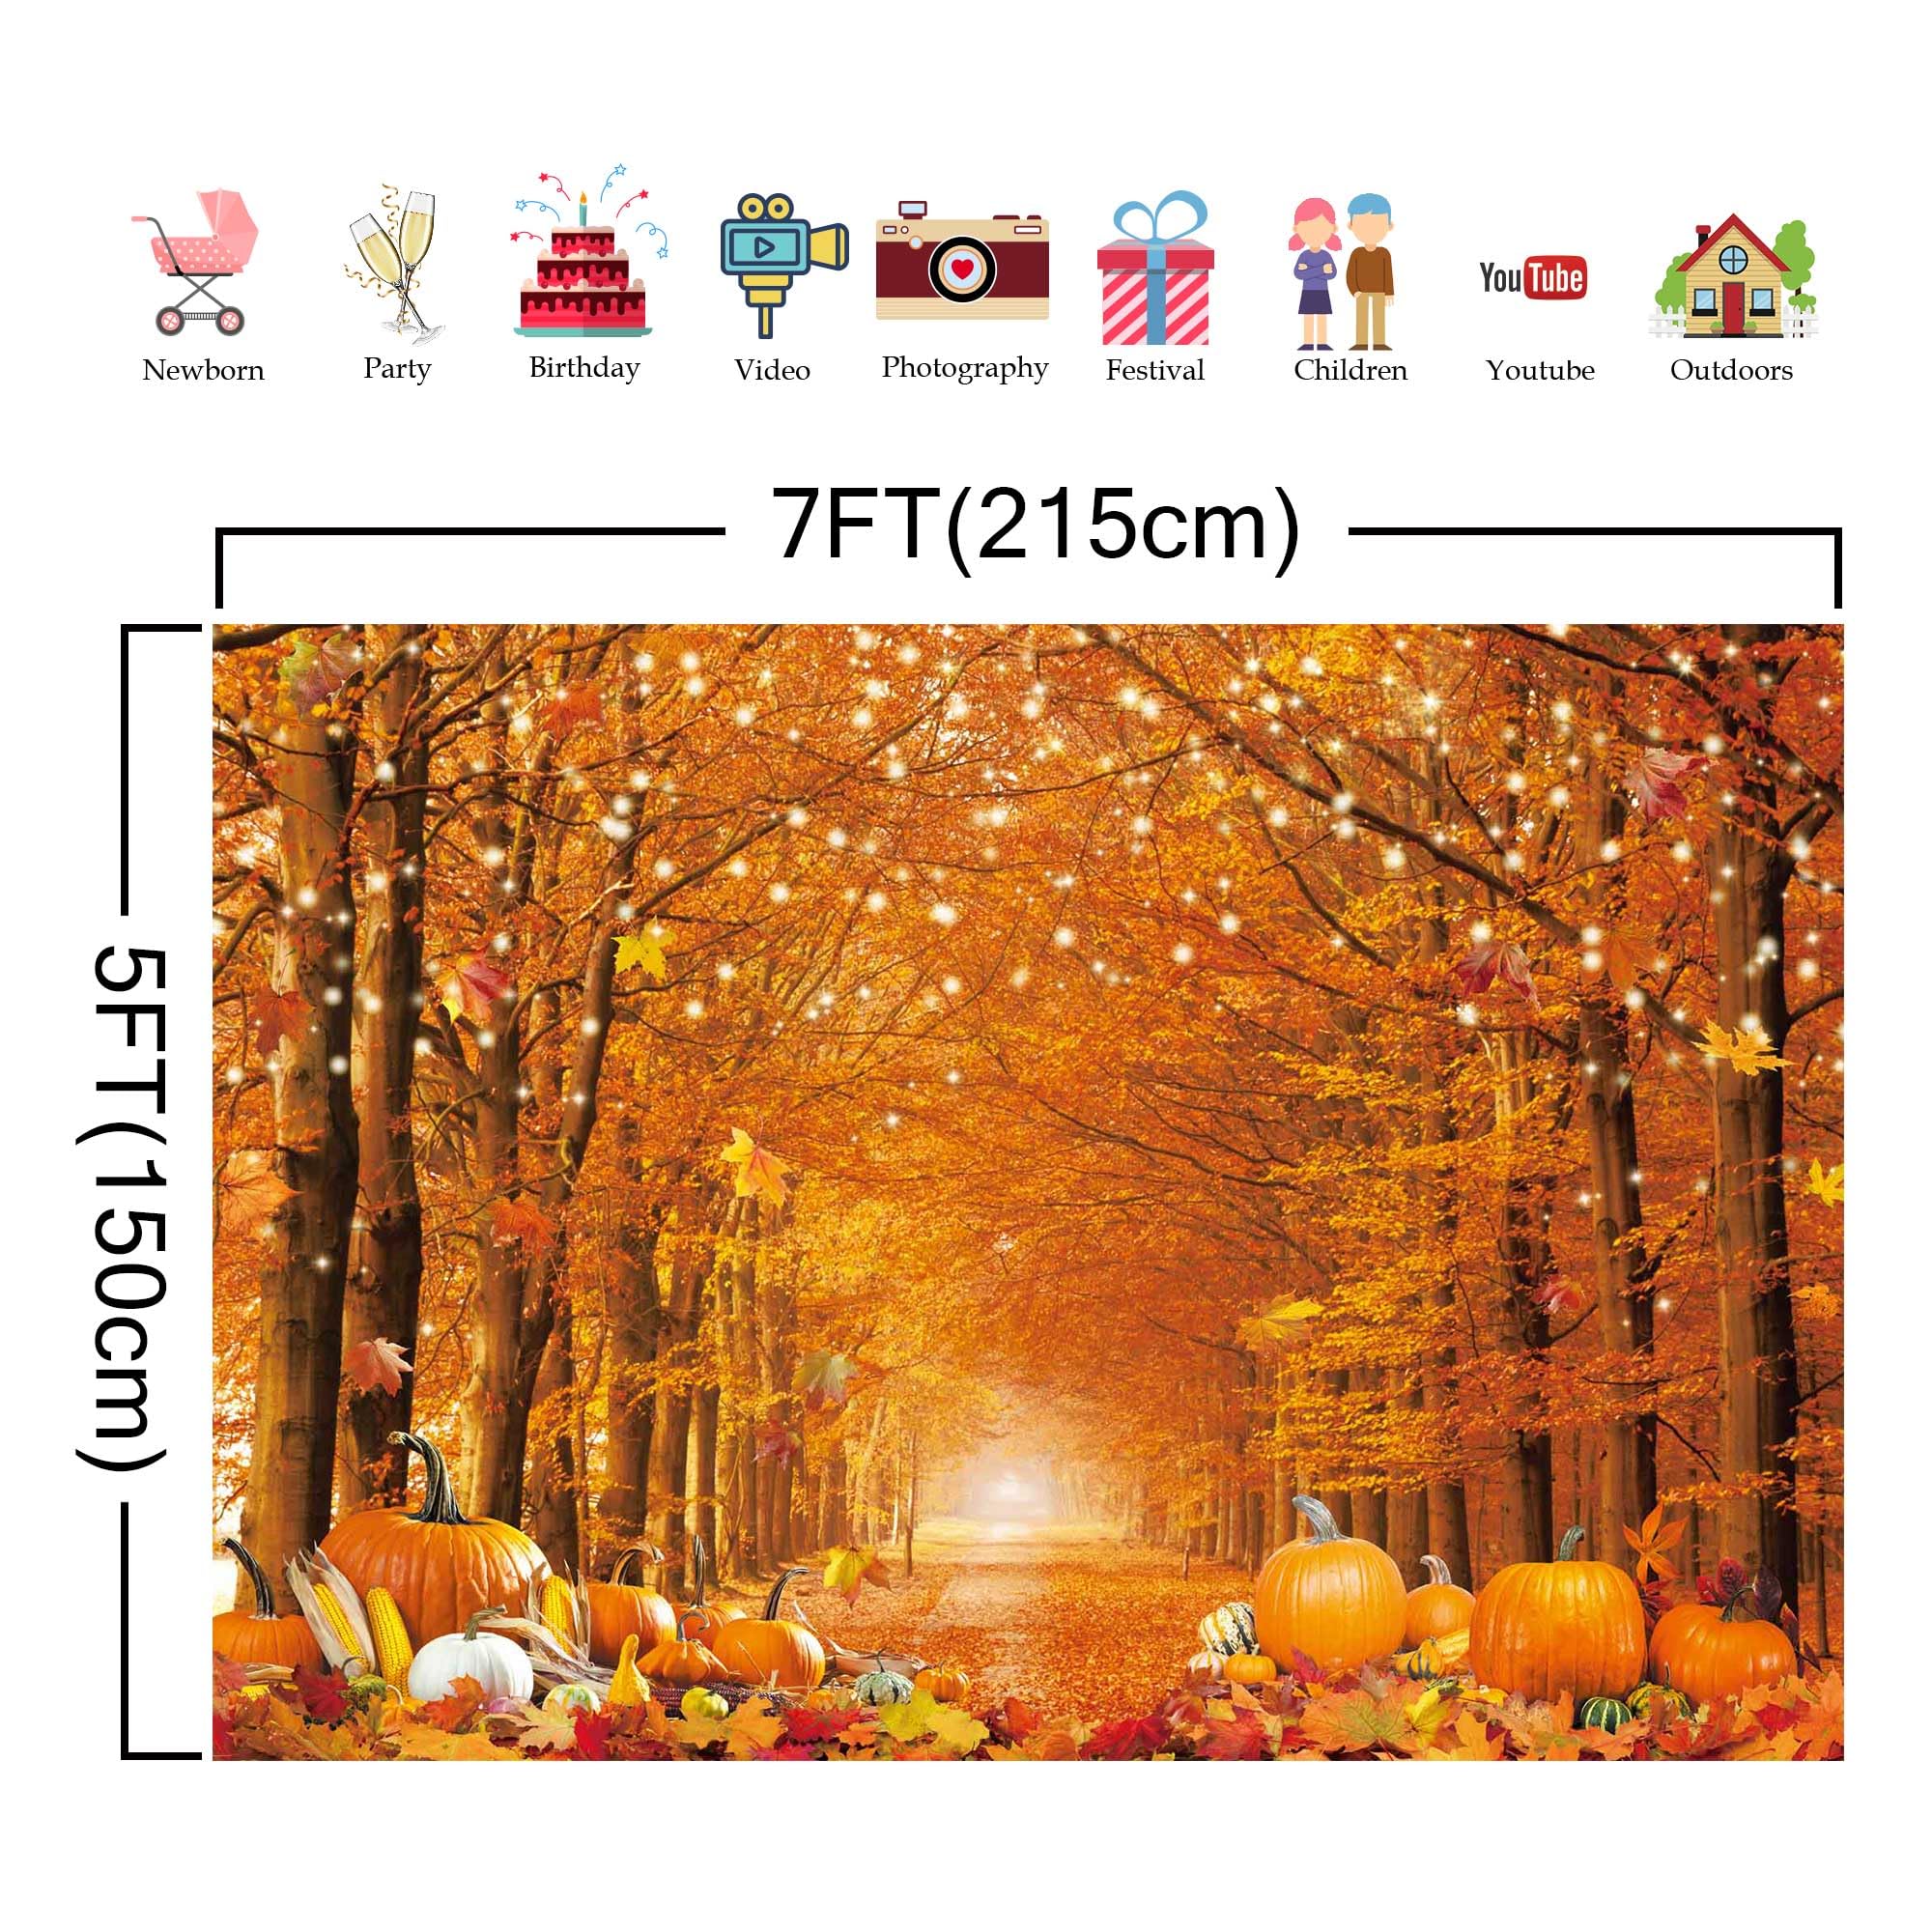 Fluzimir 7x5FT Autumn Photo Backdrop for Photography Fall Forest Thanksgiving Maple Leaves Background Fall Friendsgiving Pumpkin Party Decorations Banner